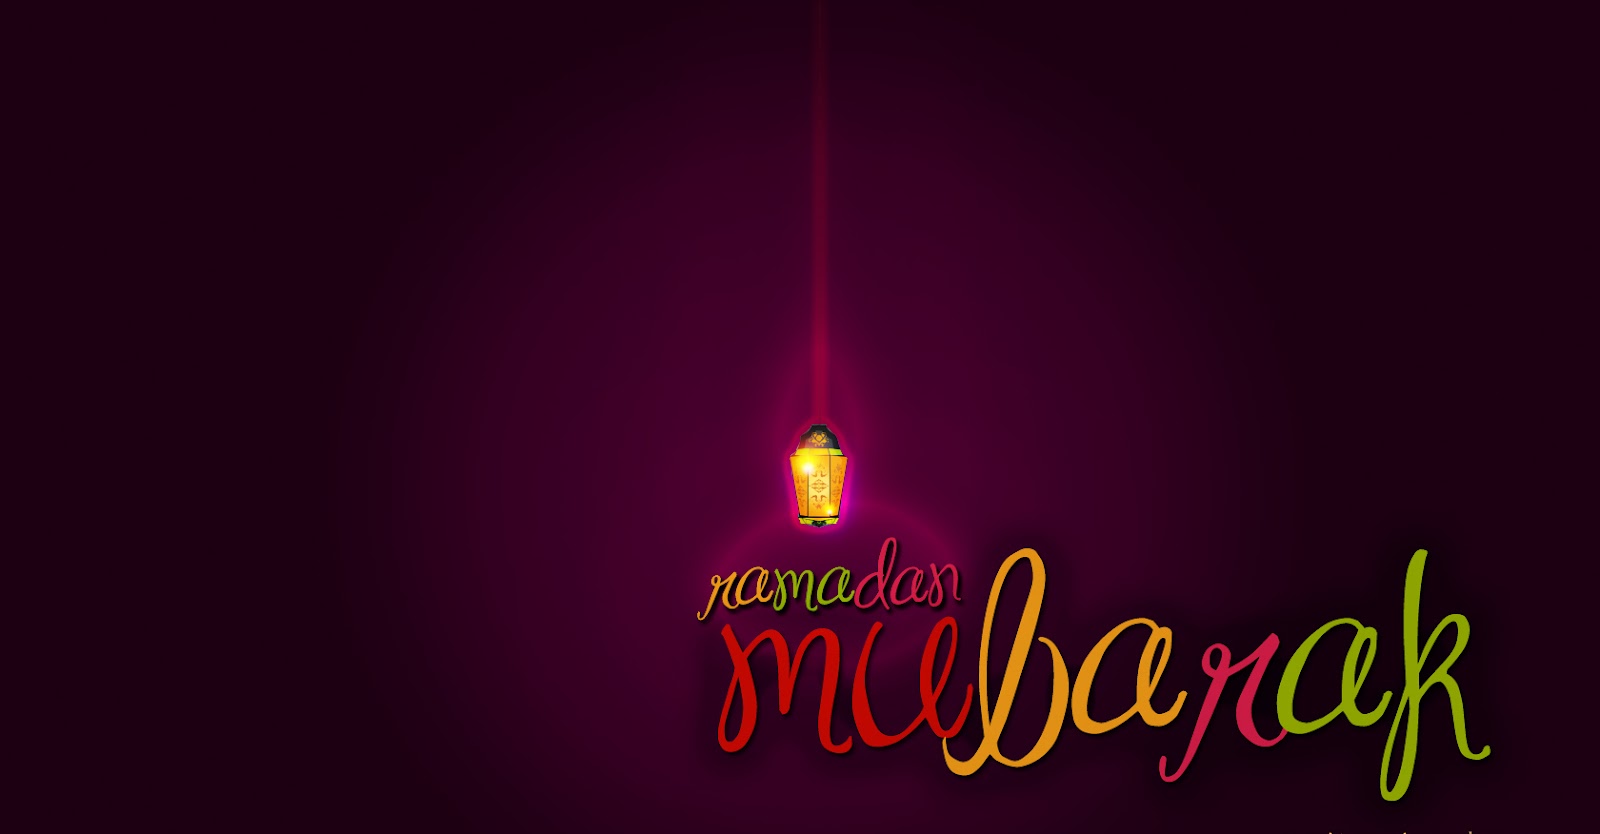 ramadan pictures and wallpapers collection,text,font,violet,purple,graphic design